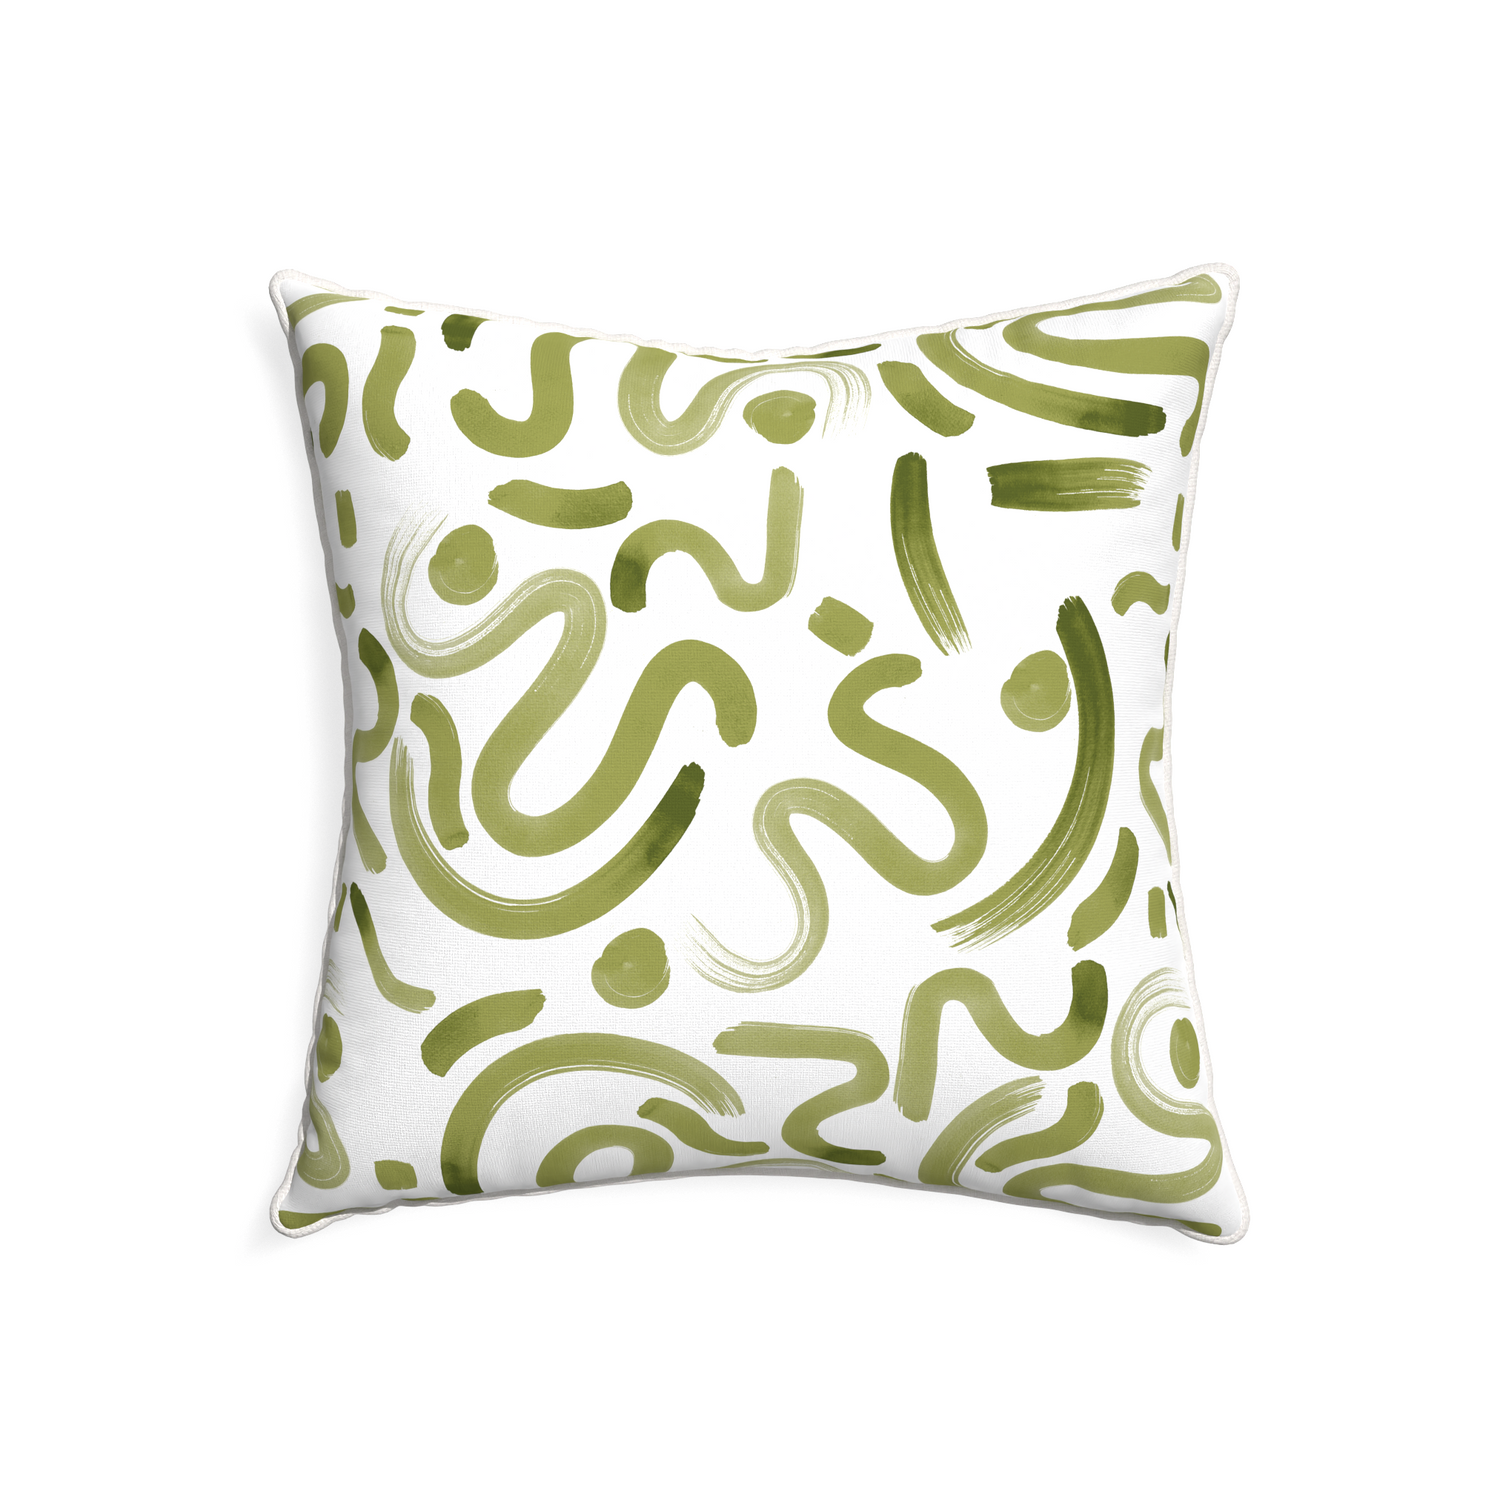 22-square hockney moss custom moss greenpillow with snow piping on white background